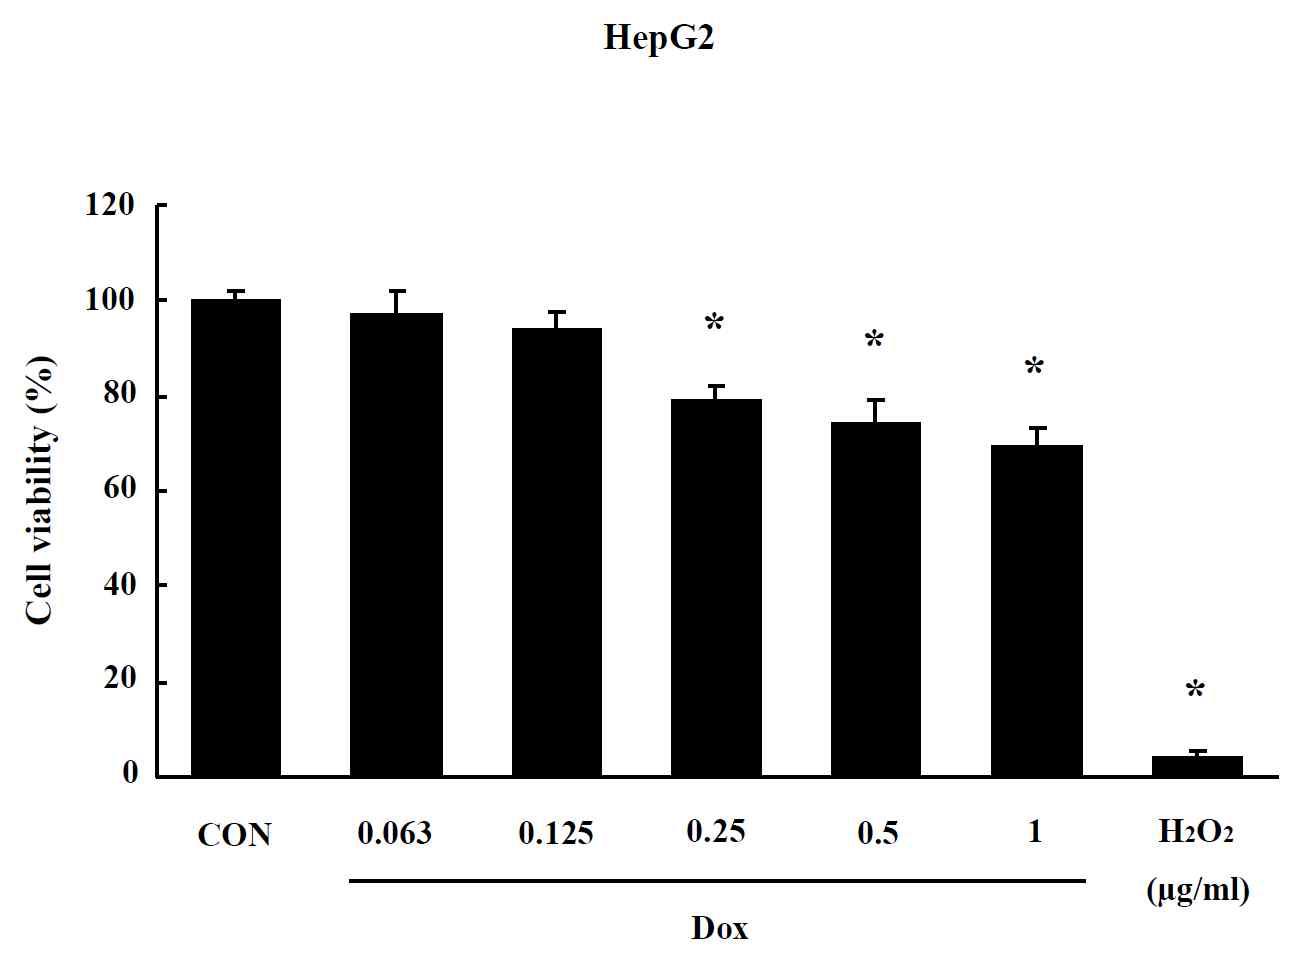 Effects of CNT on MTT assay in HepG2 cells. Cells were treated with drug for 24 hr. Data are shown as means ± SE (n = 5). * p<0.05, significantly different from the control.